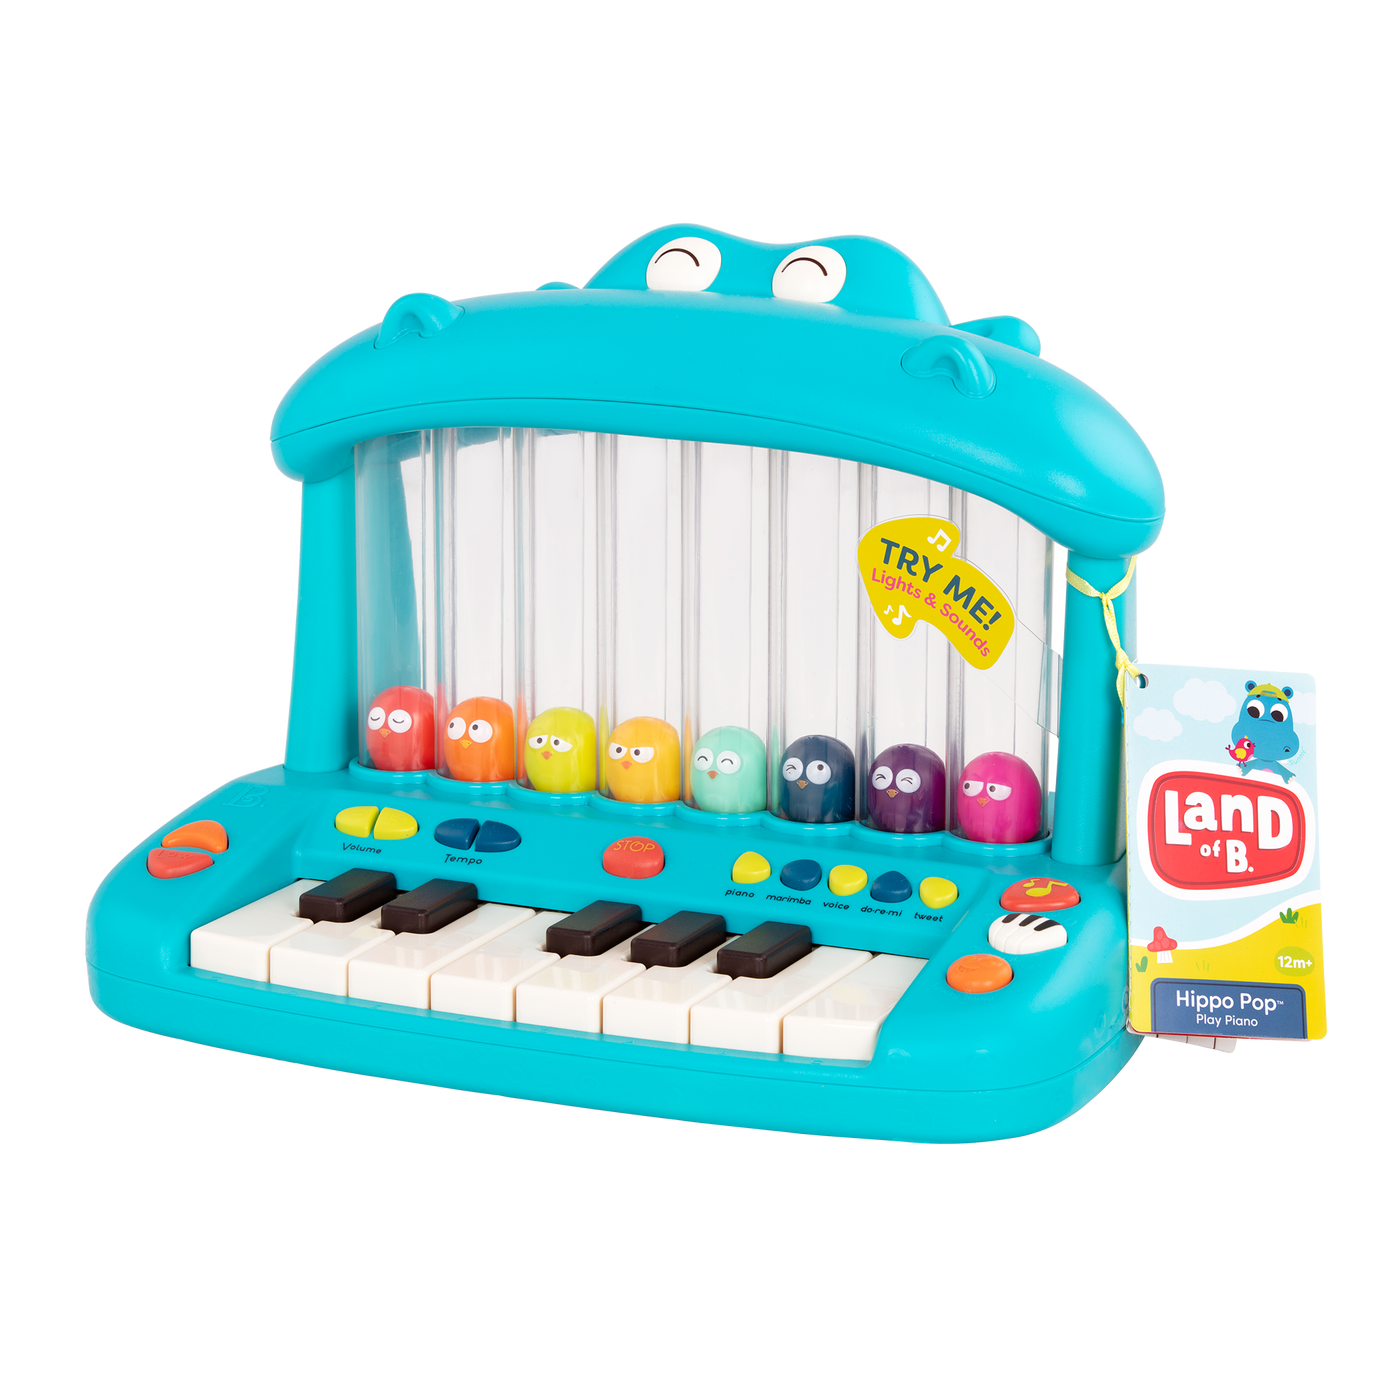 Hippo-shaped play piano for kids with 8 colorful birds.